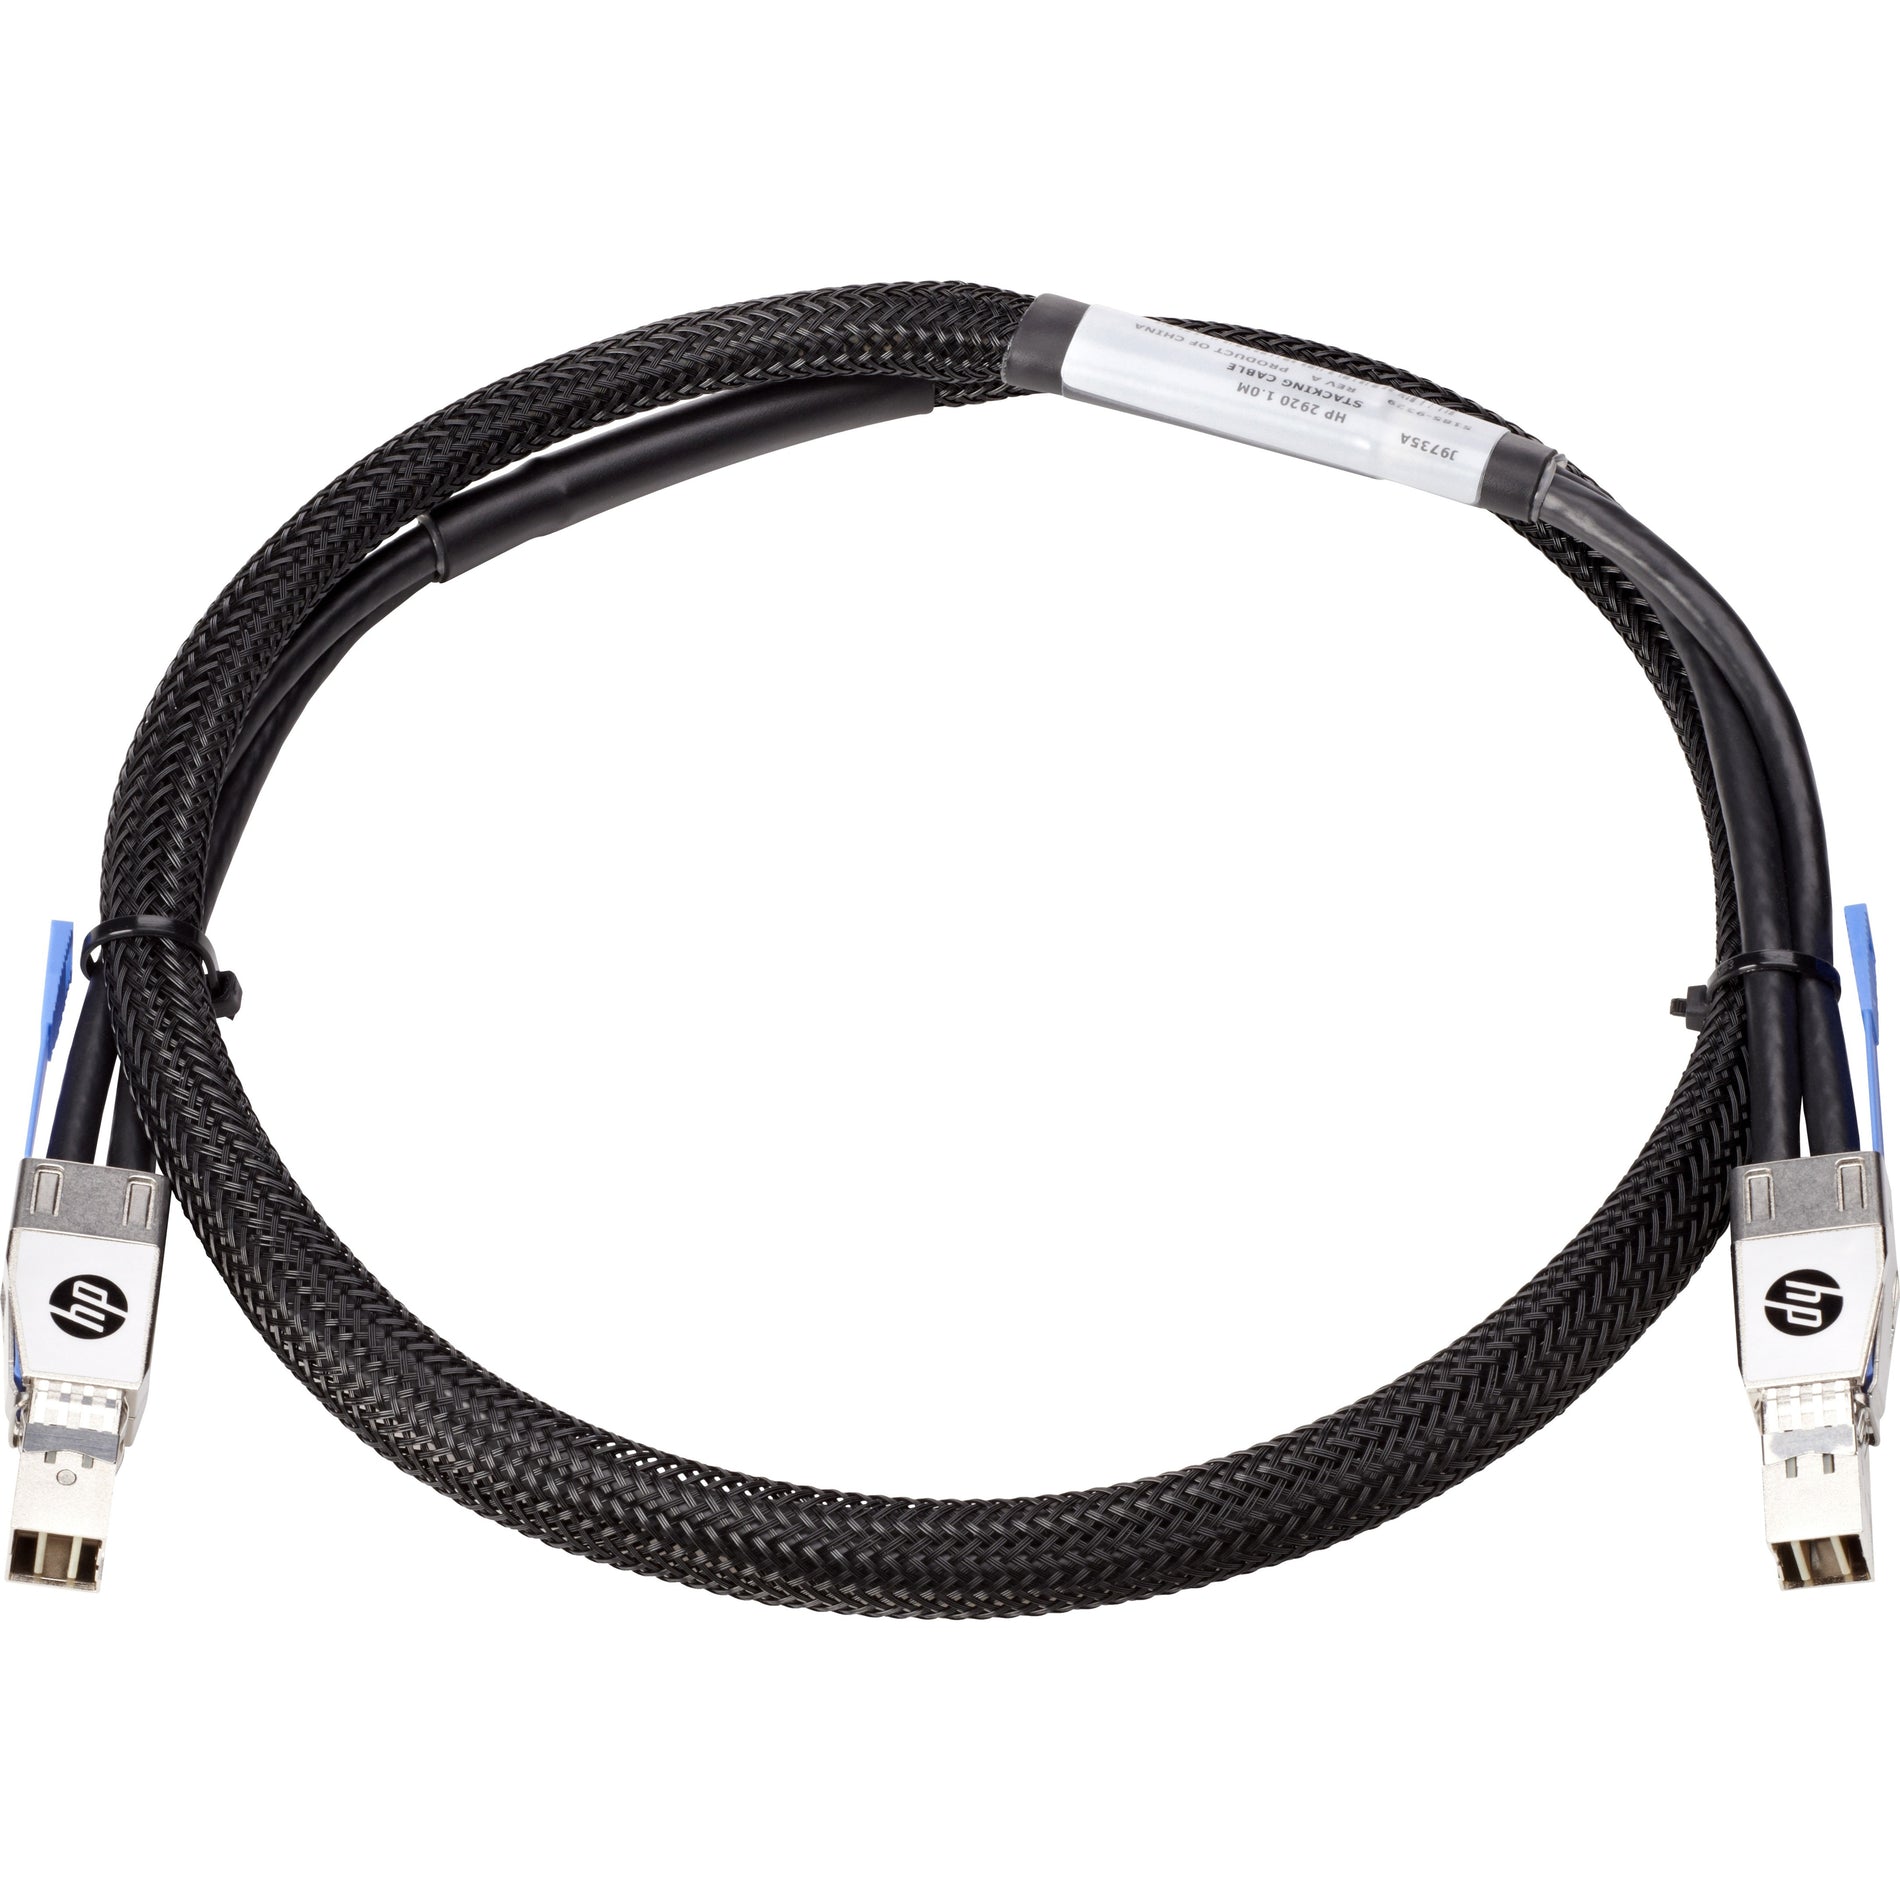 HPE J9736A 2920 3.0m Stacking Cable, 9.84 ft, Copper Conductor, Black